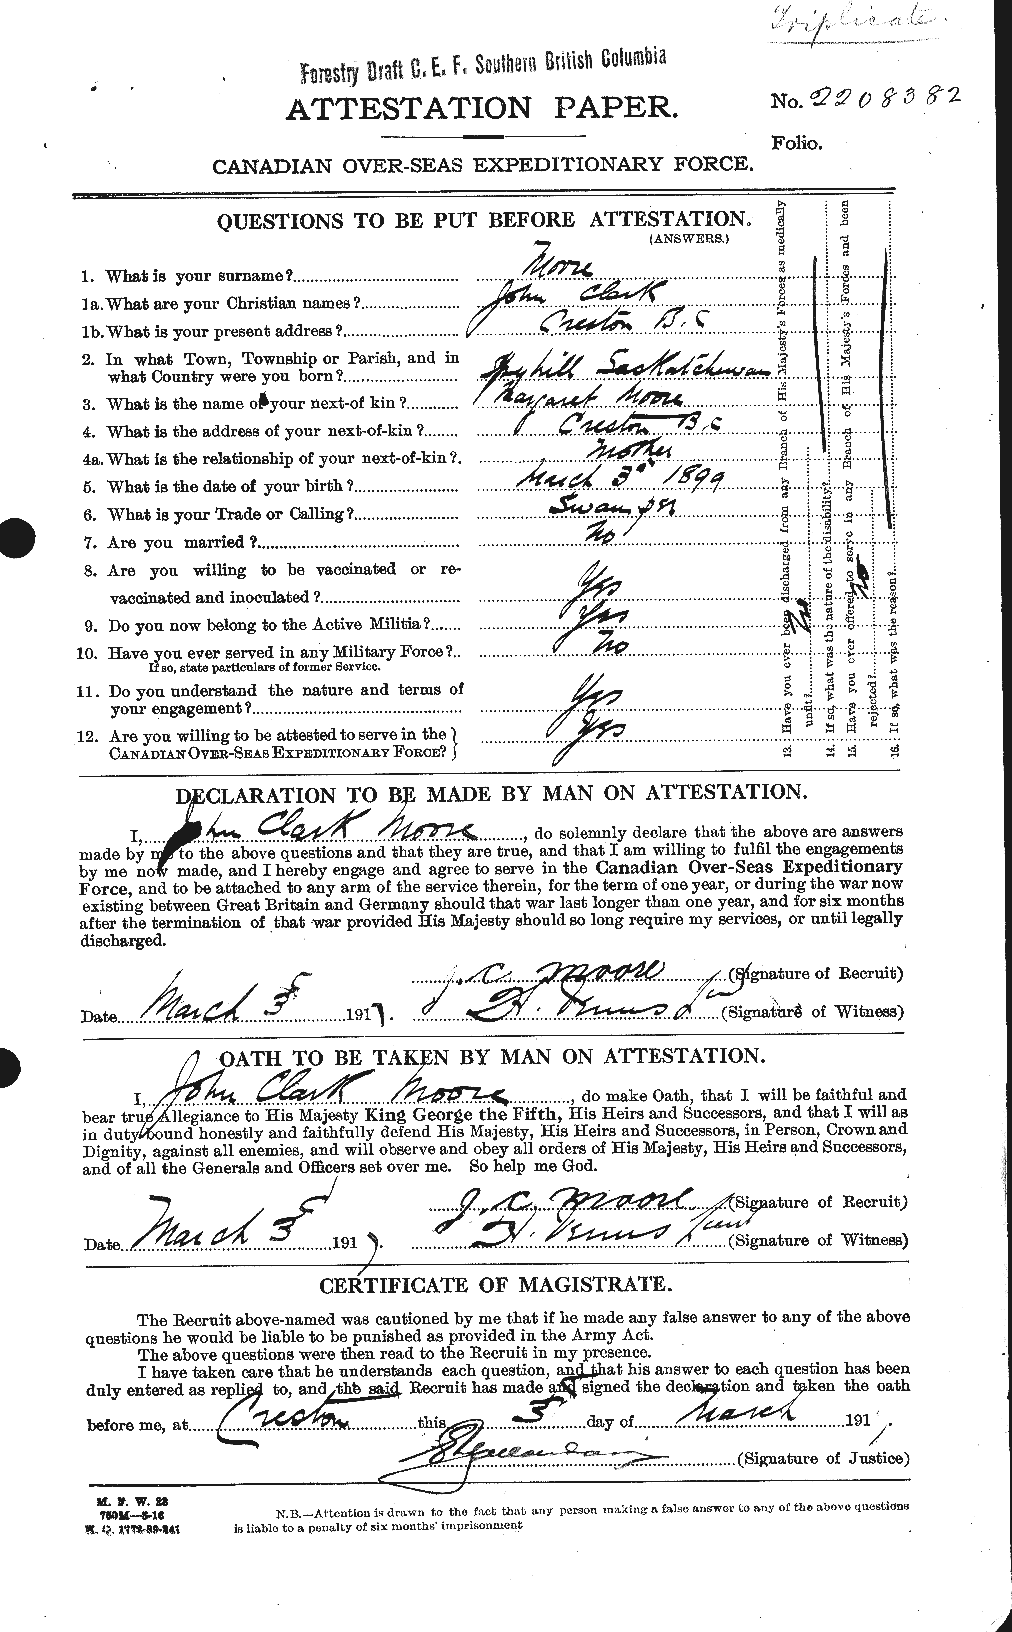 Personnel Records of the First World War - CEF 503271a